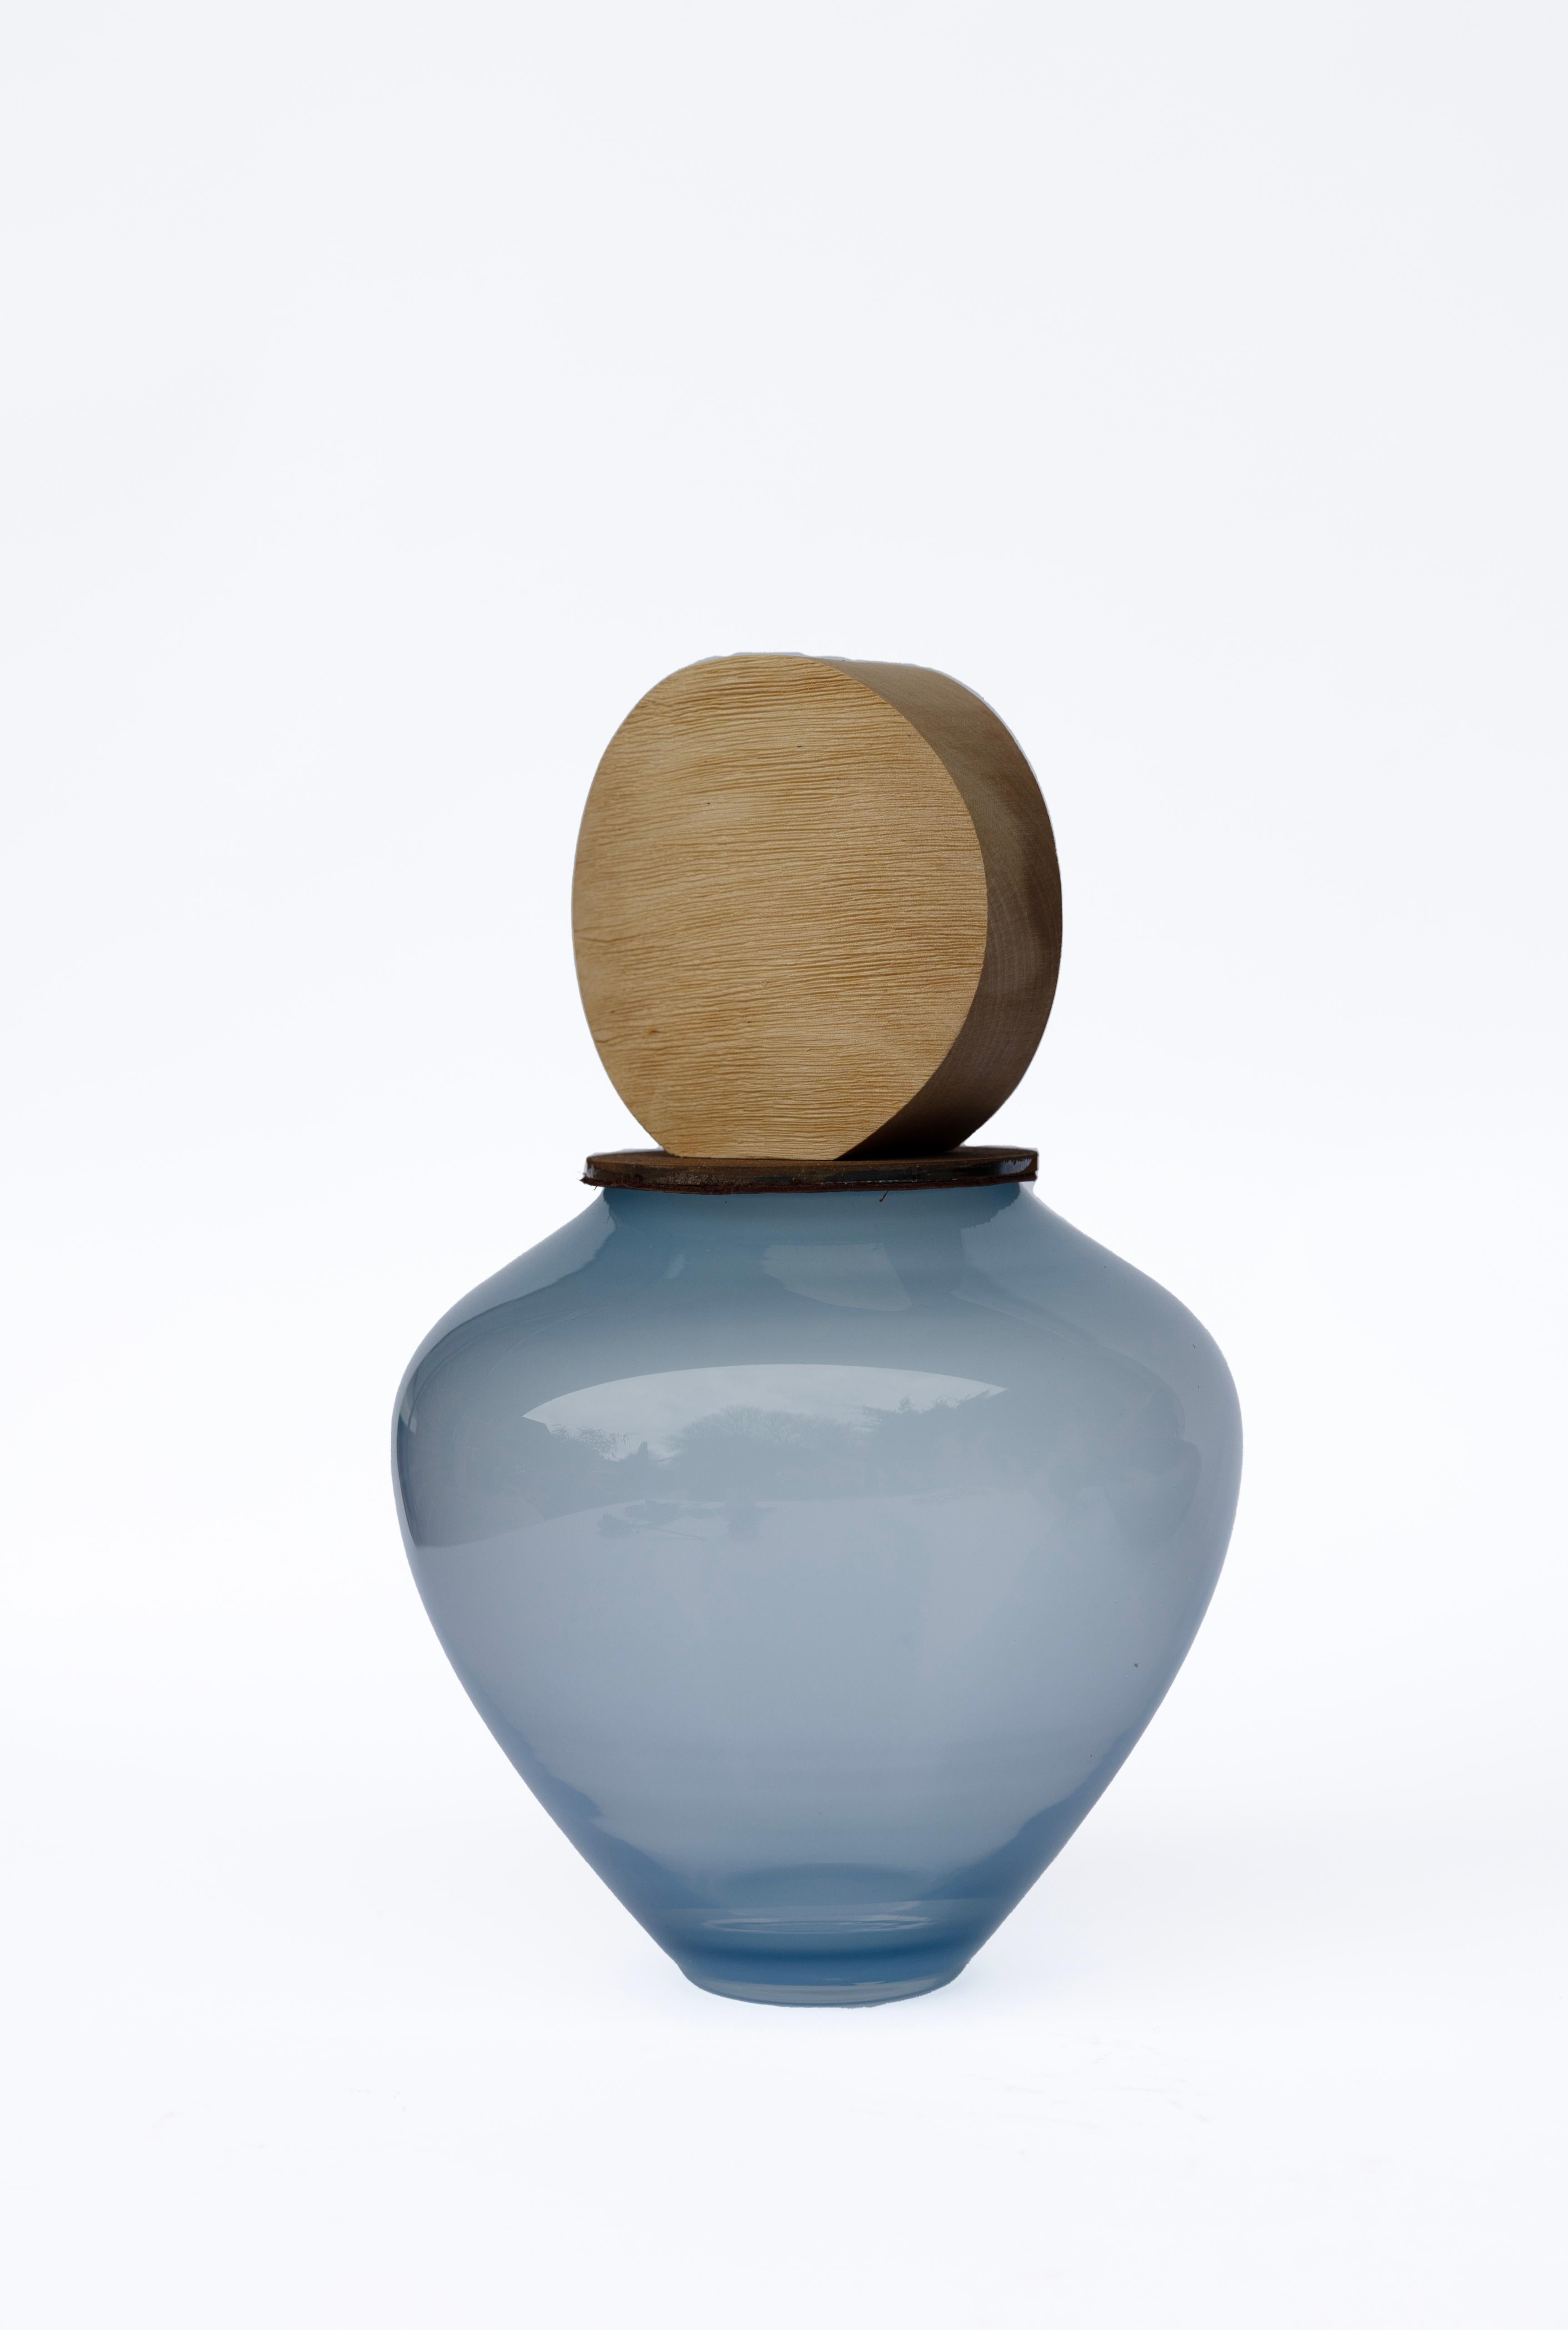 Ohana Stacking Pigeon Blue S & Round Vessel by Pia Wüstenberg
Unique Piece. Handmade In Europe.
Dimensions: Ø 19 x H 25 cm.
Materials: Handblown glass, ceramic and wood.

Available in different color options. Dimensions are approximate, due to the